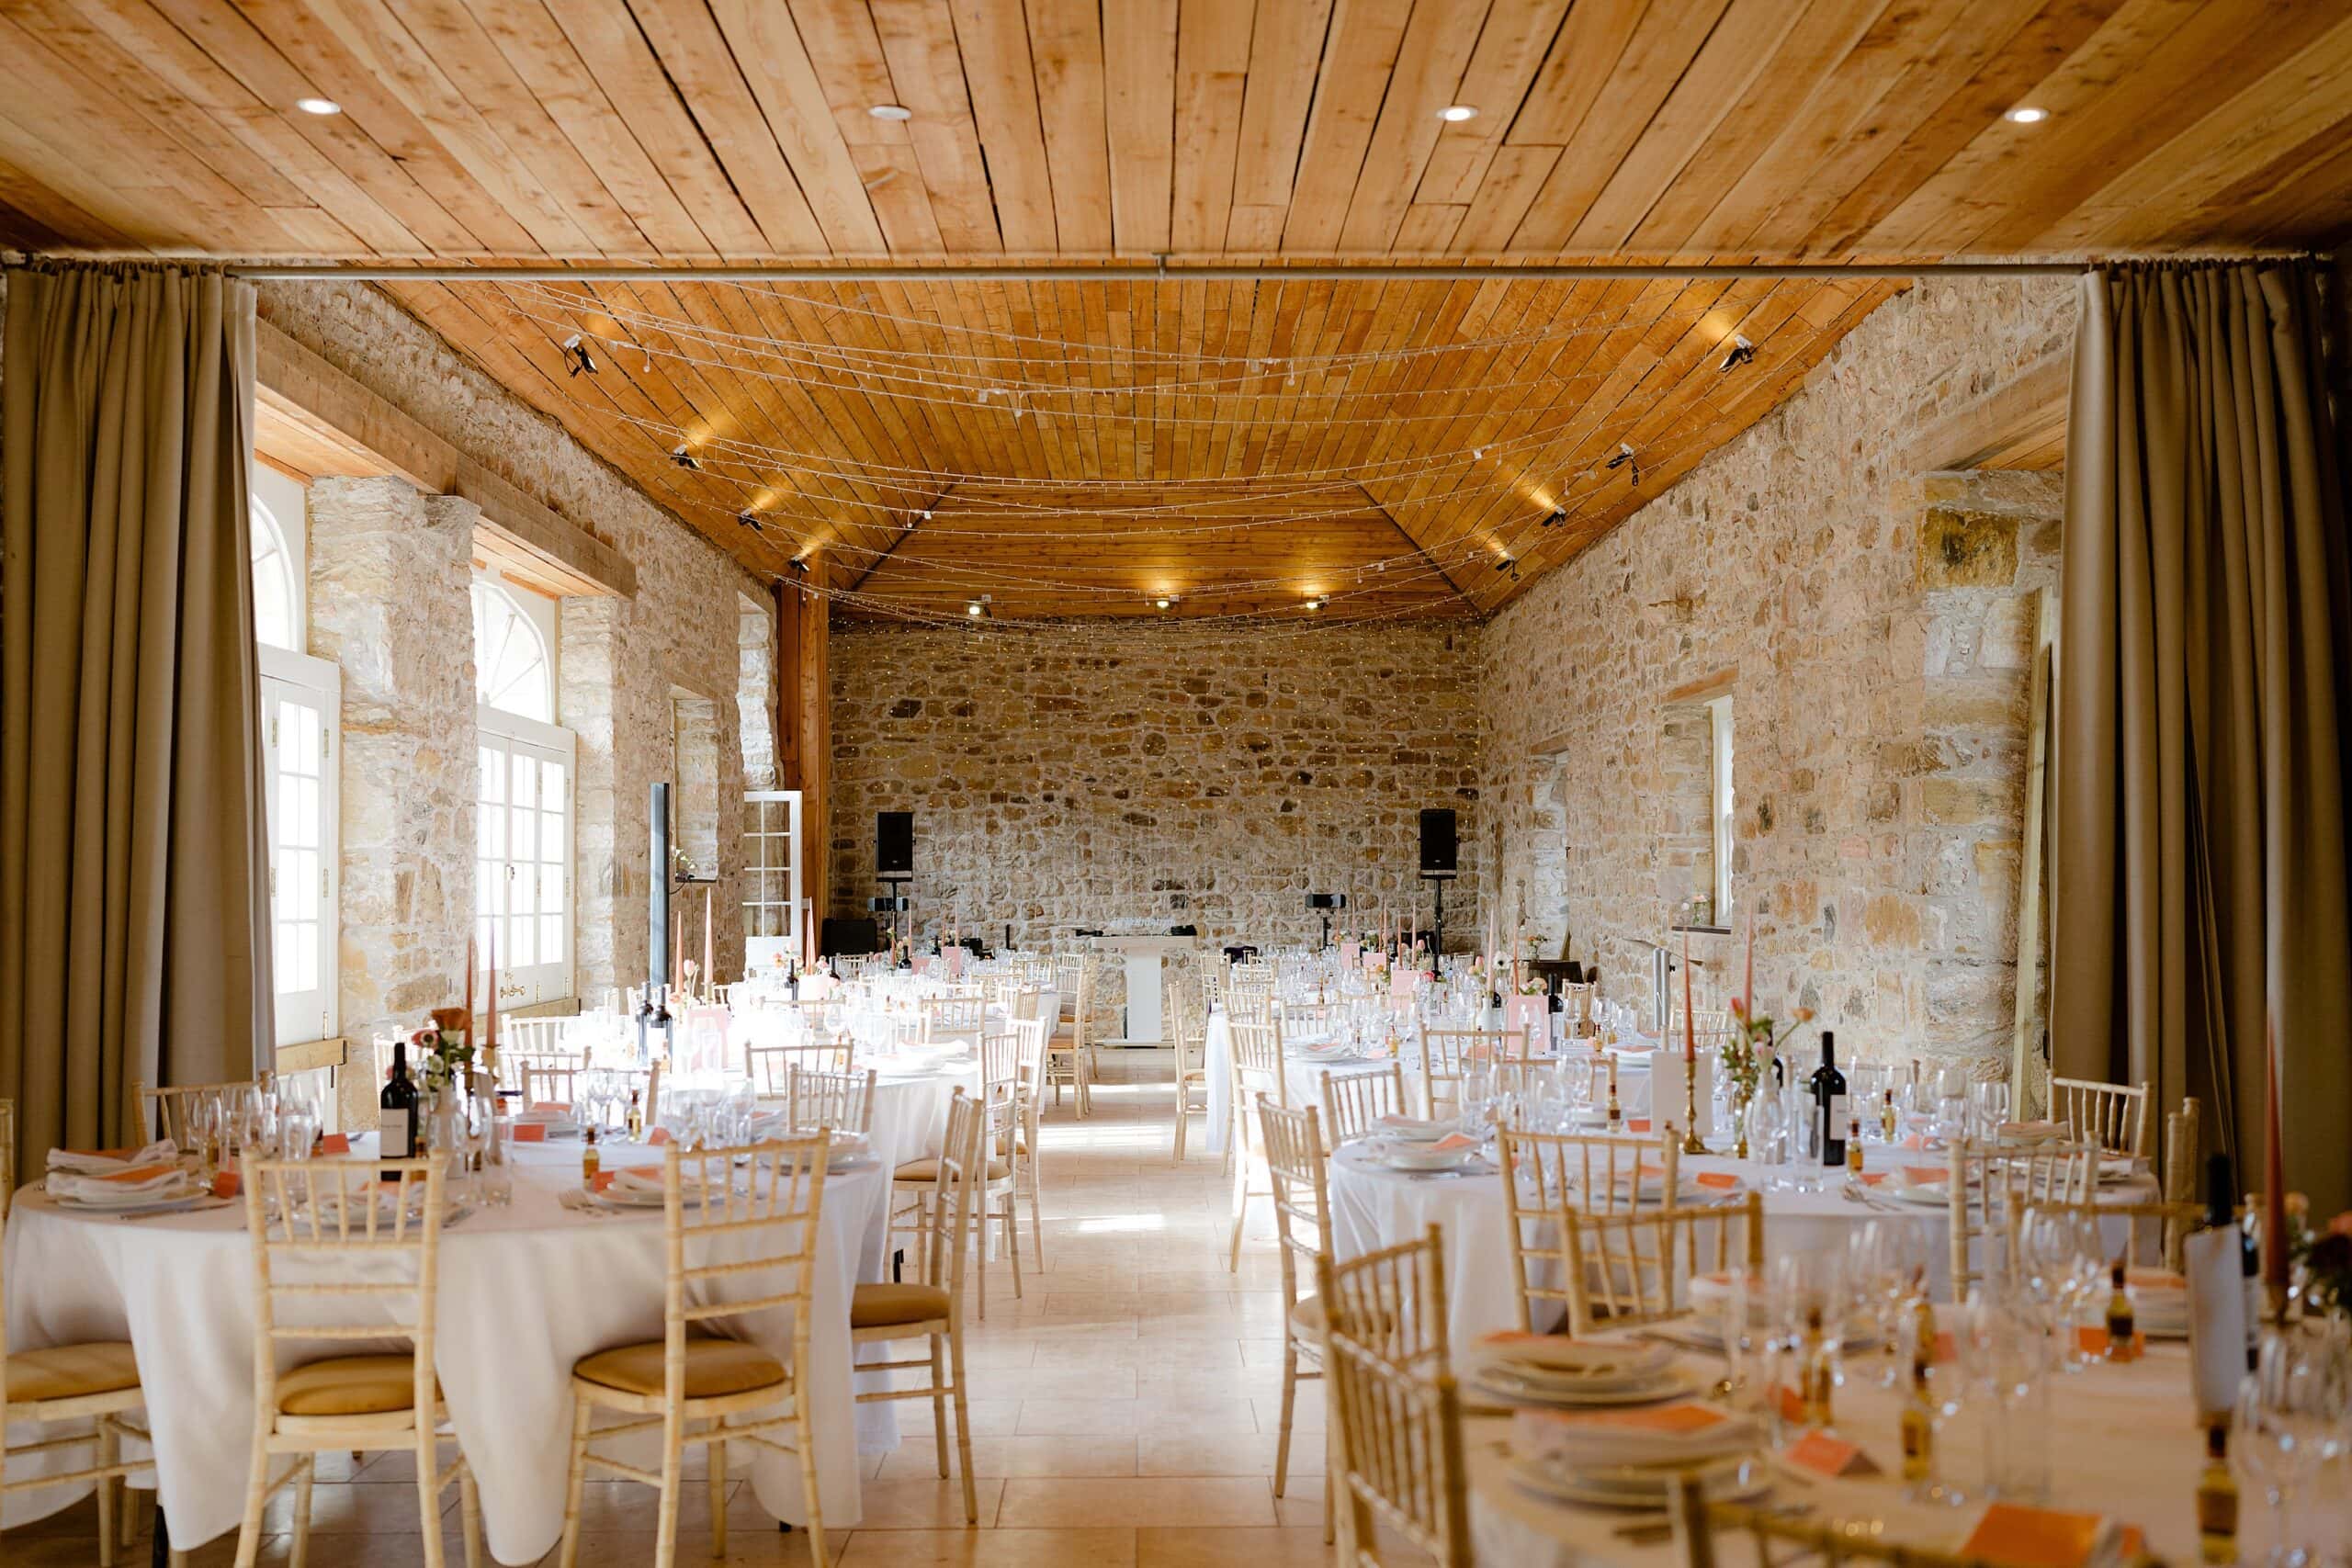 interior inside view of a farm wedding venue with stone walls and a wooden ceiling showing tables set for dinner and fairy lights hanging above